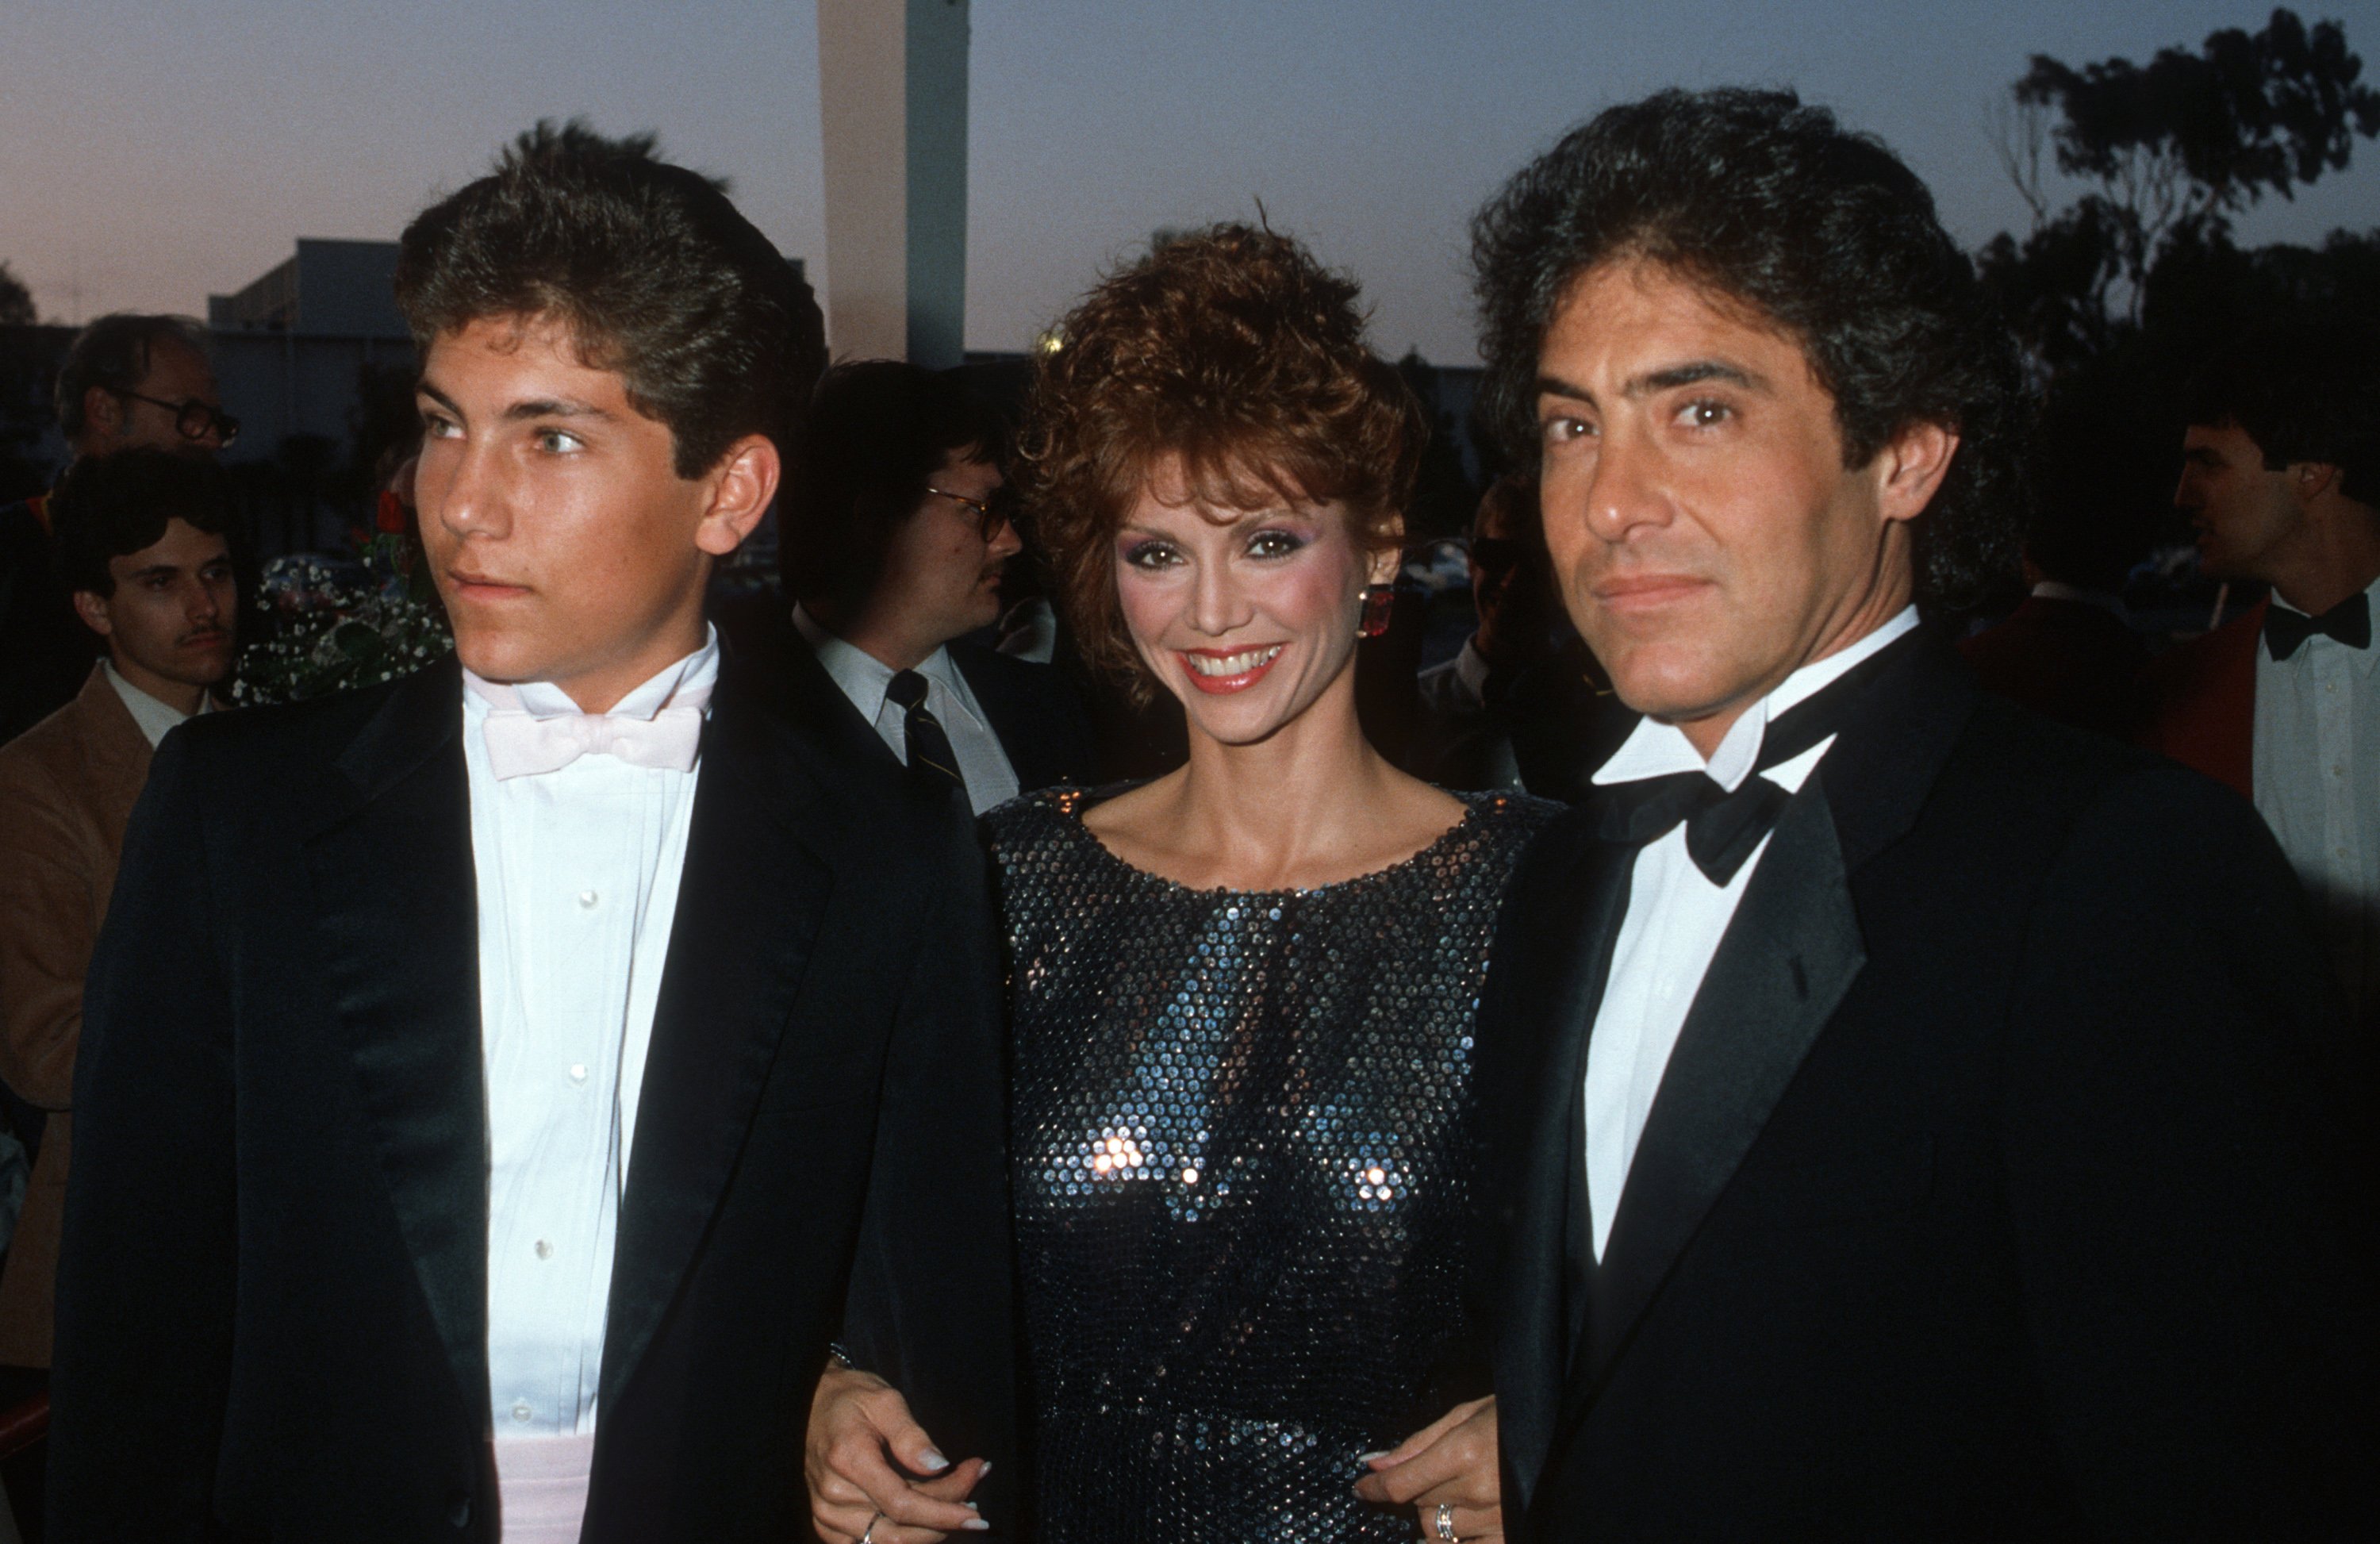 Andrew Glassman, Victoria Principal and Harry Glassman at the 10th Annual Choice Awards. | Source: Getty Images